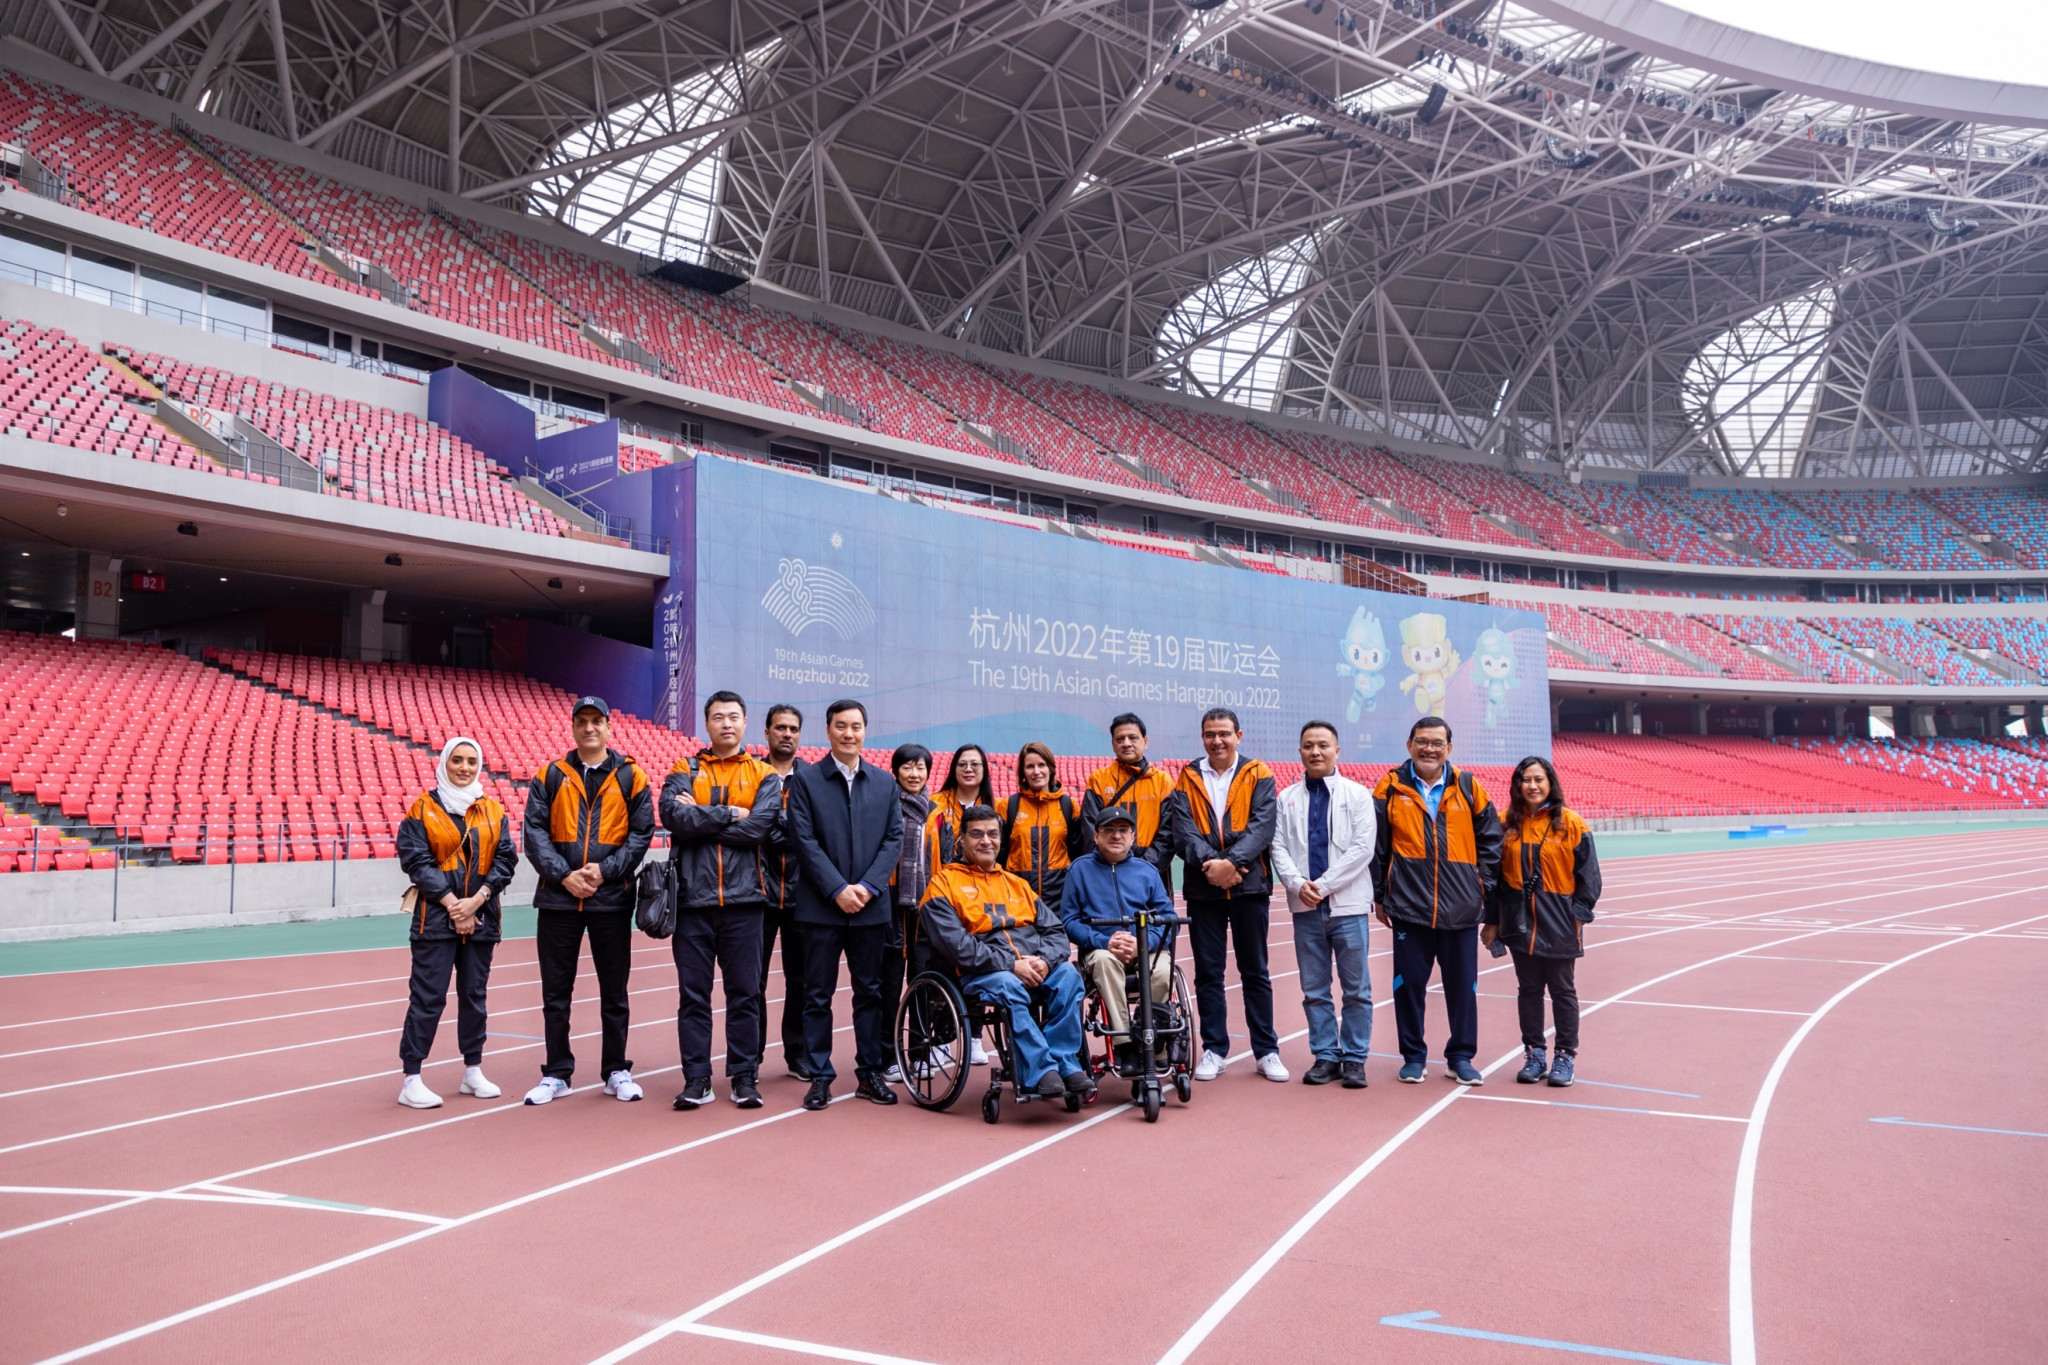 An APC delegaiton got the chance to tour venues that are set to be used during the Asian Para Games ©APC